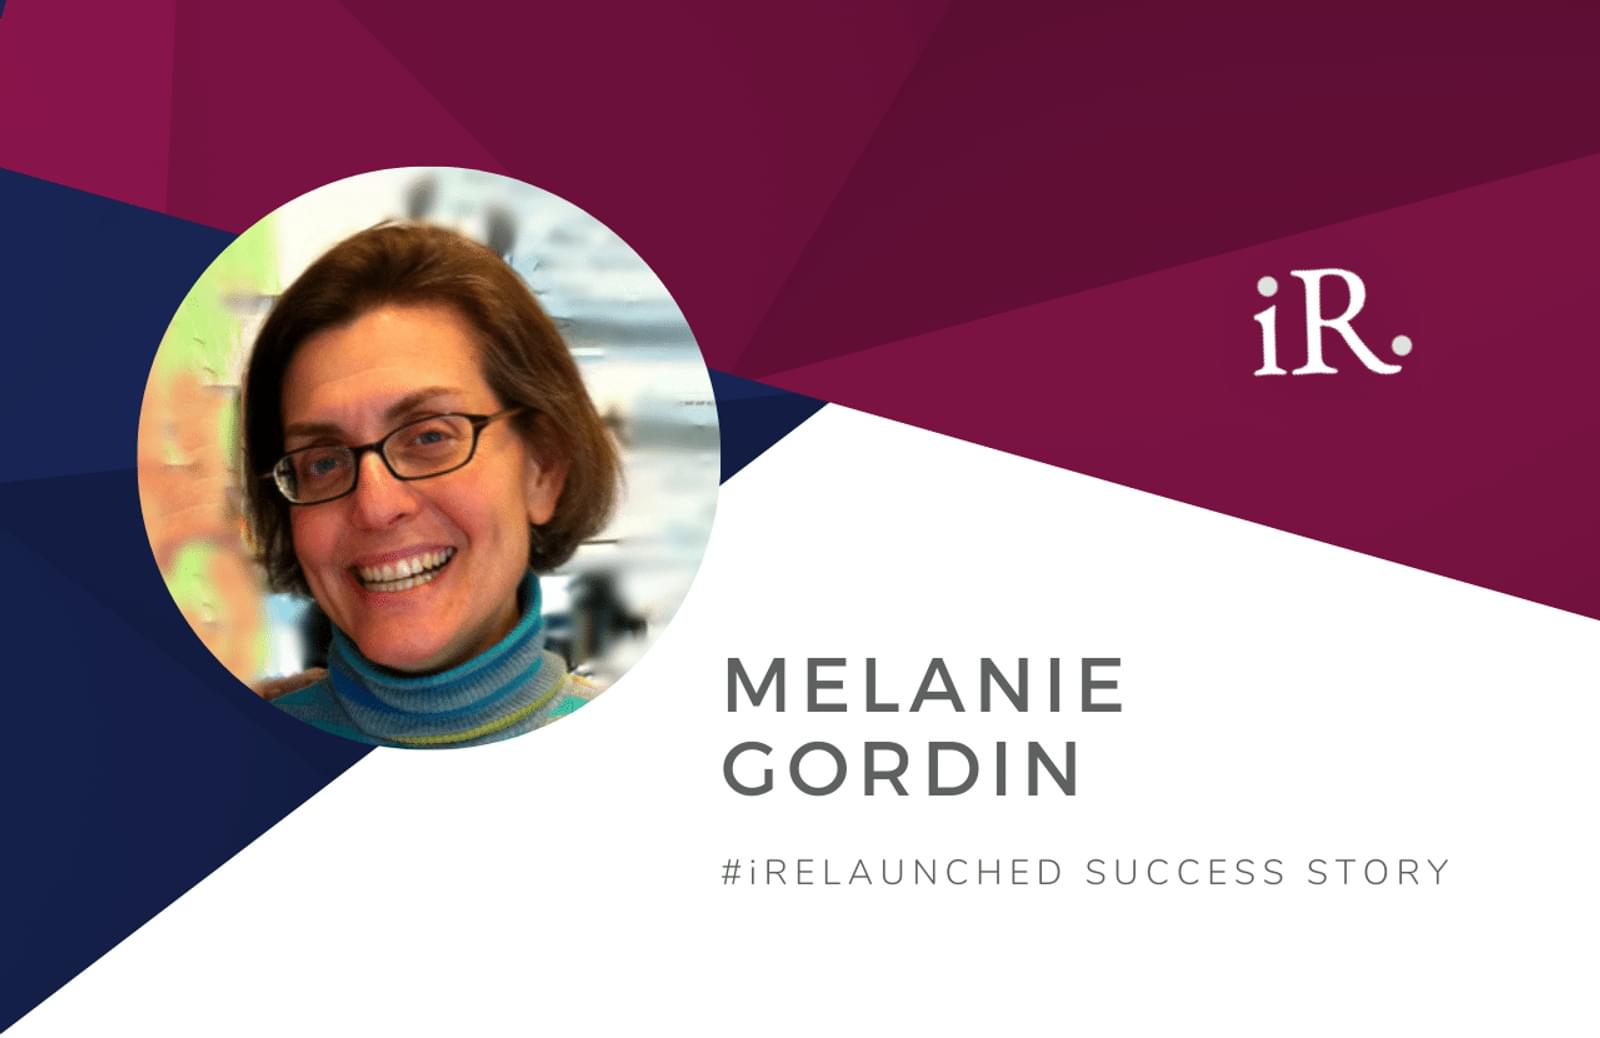 Melanie Gordin's headshot and the text #iRelaunched Success Story along with the iRelaunch logo.  A navy and maroon geometric textured background intersect behind Melanie's headshot.